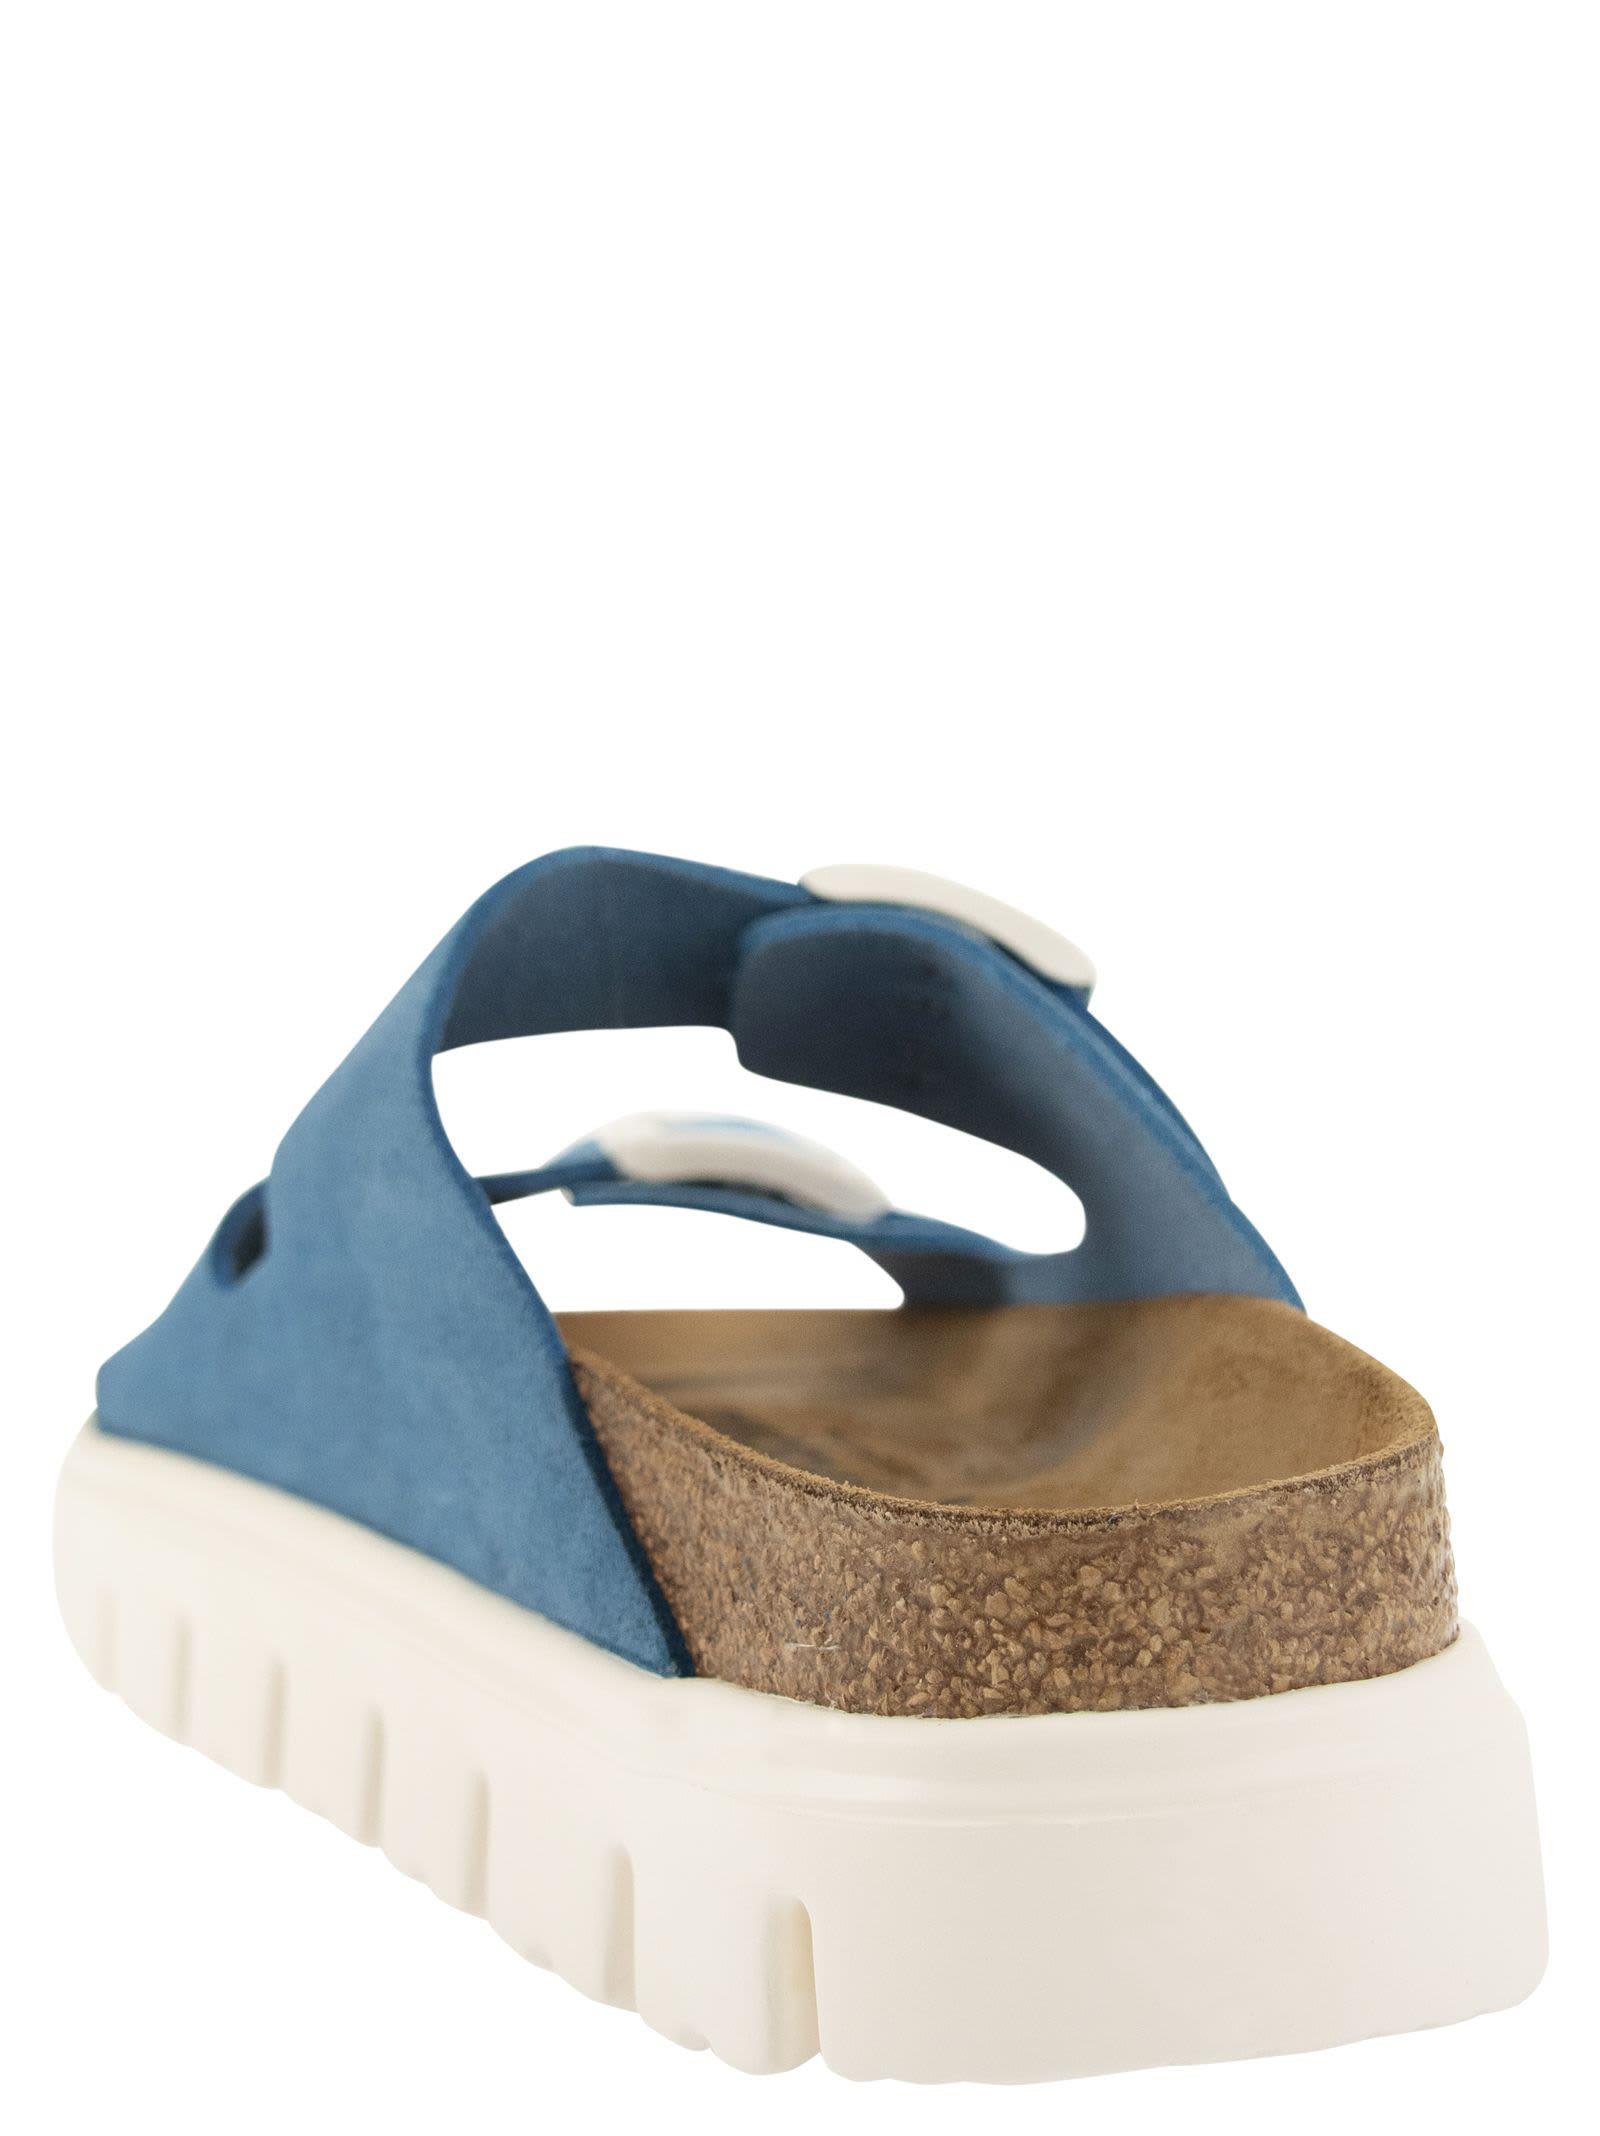 Birkenstock Arizona Pap Chunky - Sandal With Buckles in Blue | Lyst